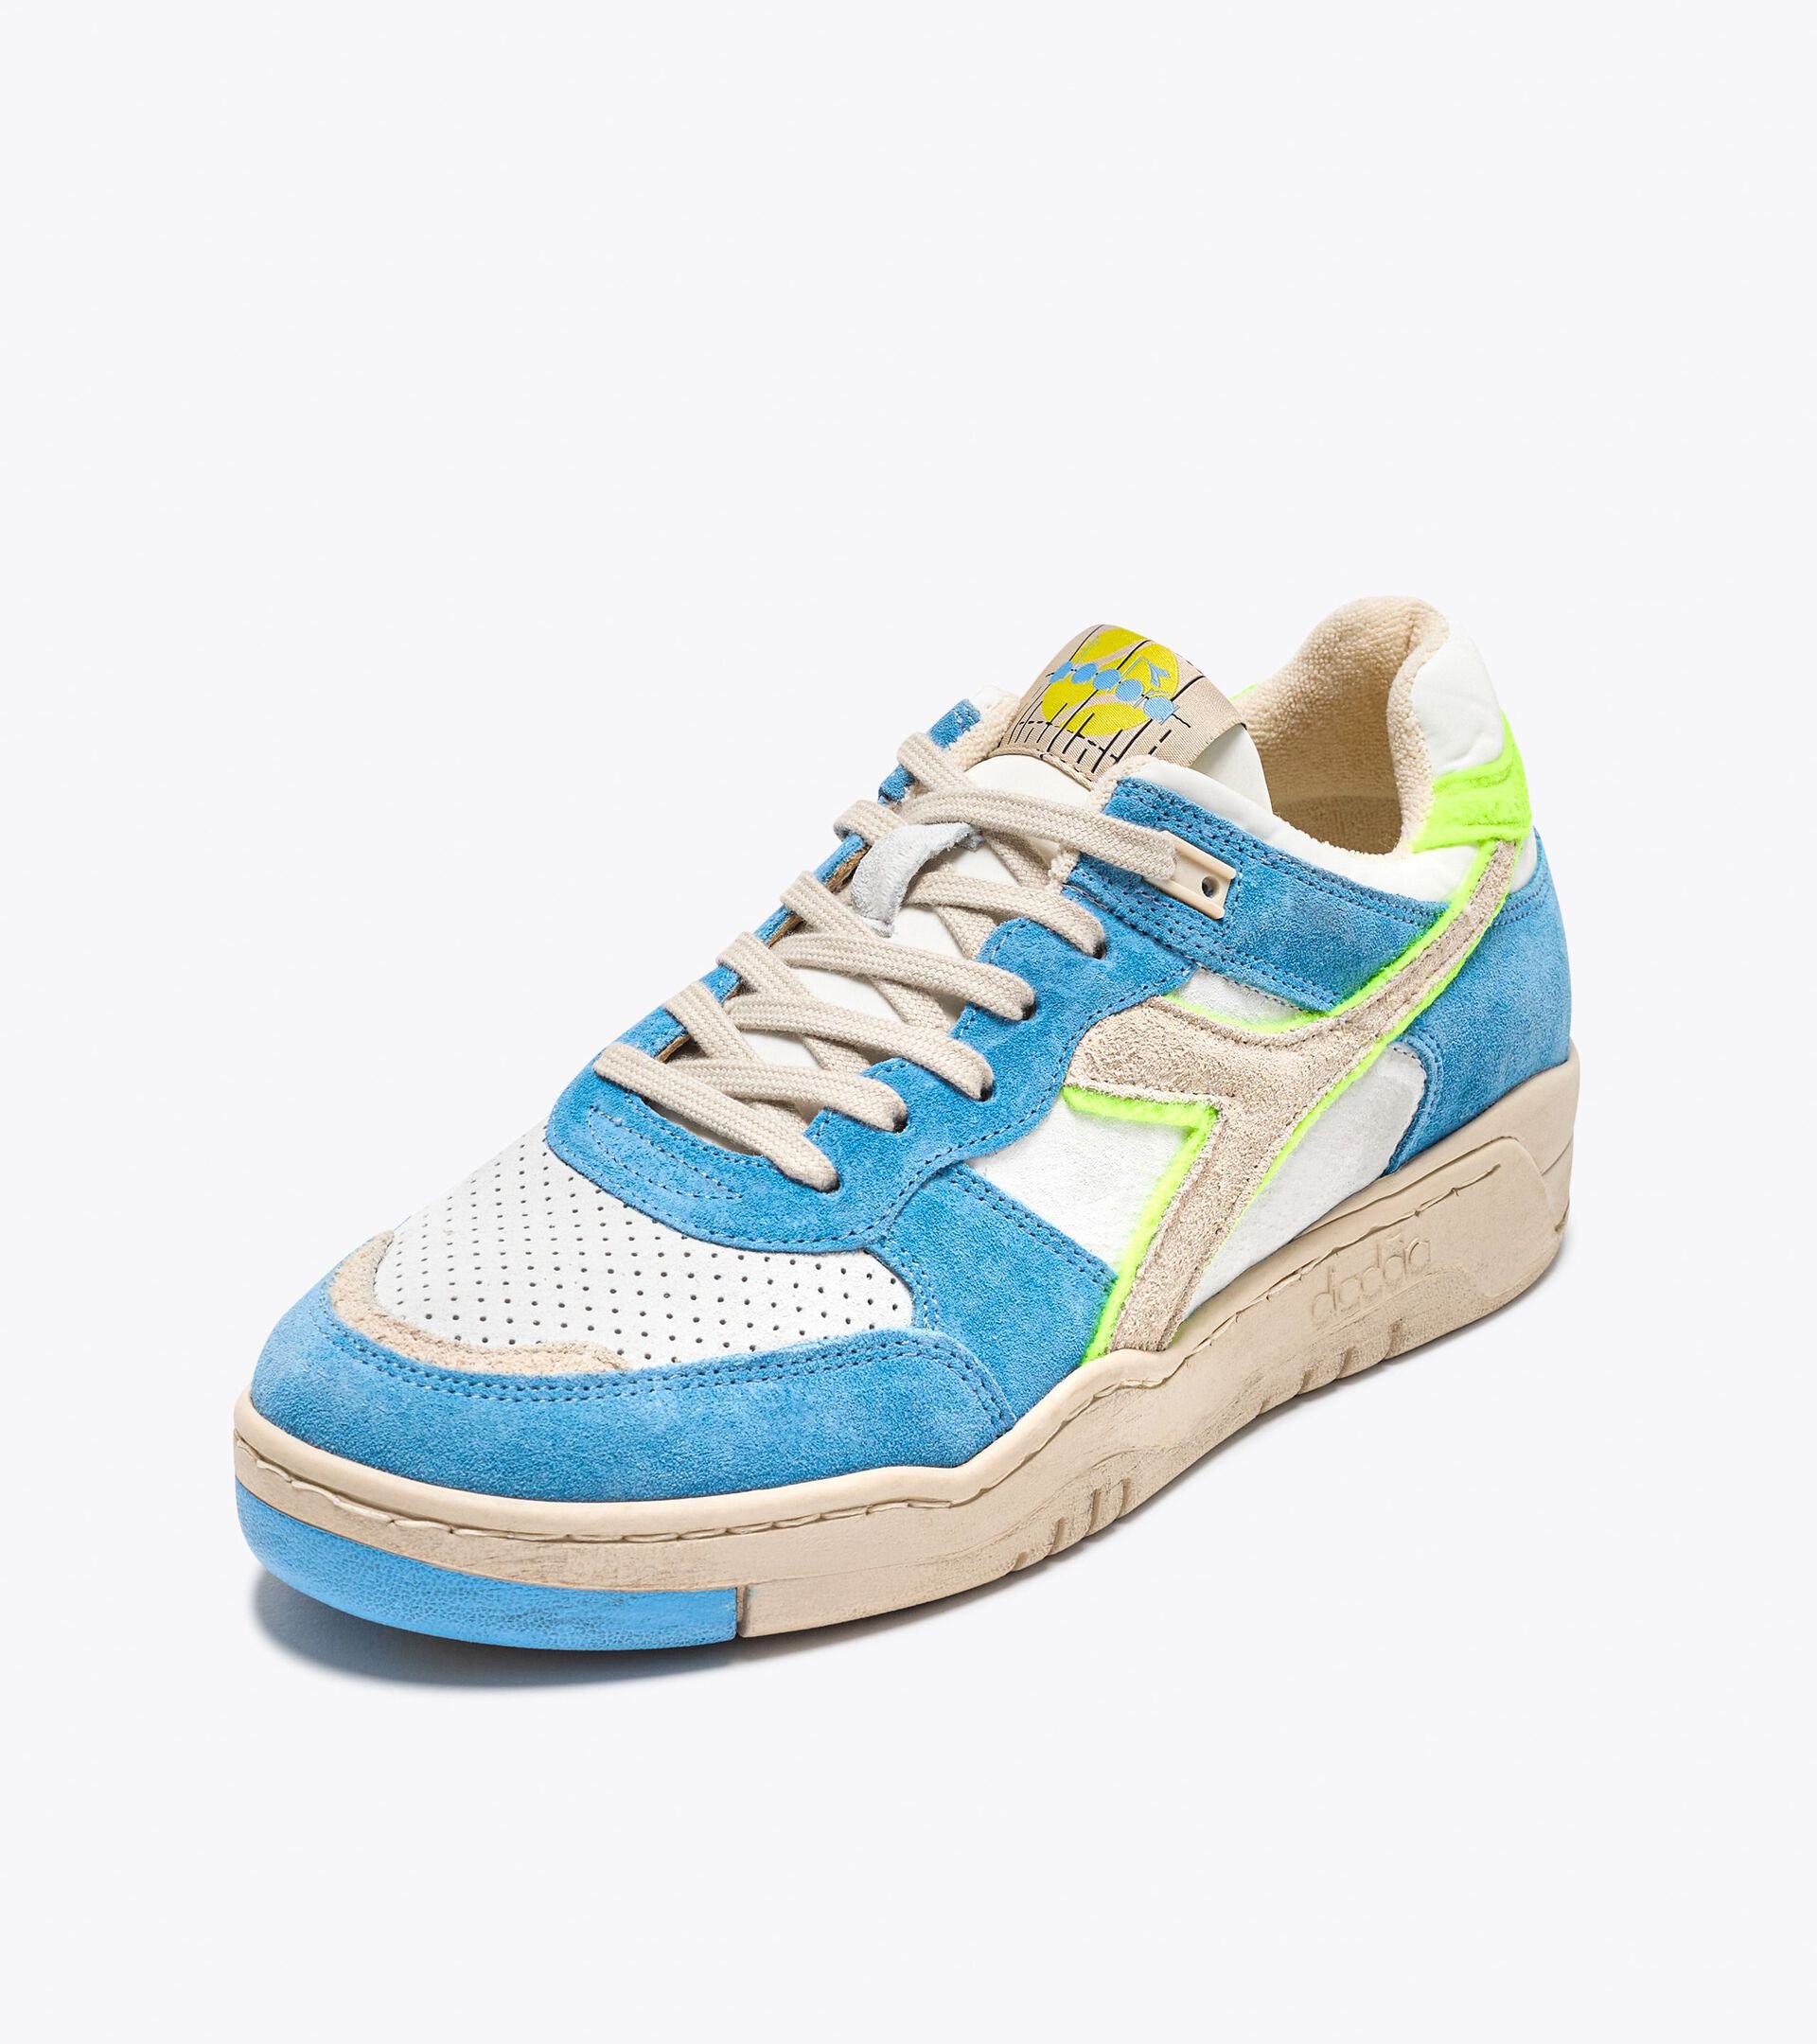 B.560 USED AA ITALIA Heritage sneakers - Made in Italy - Gender Neutral -  Diadora Online Store US